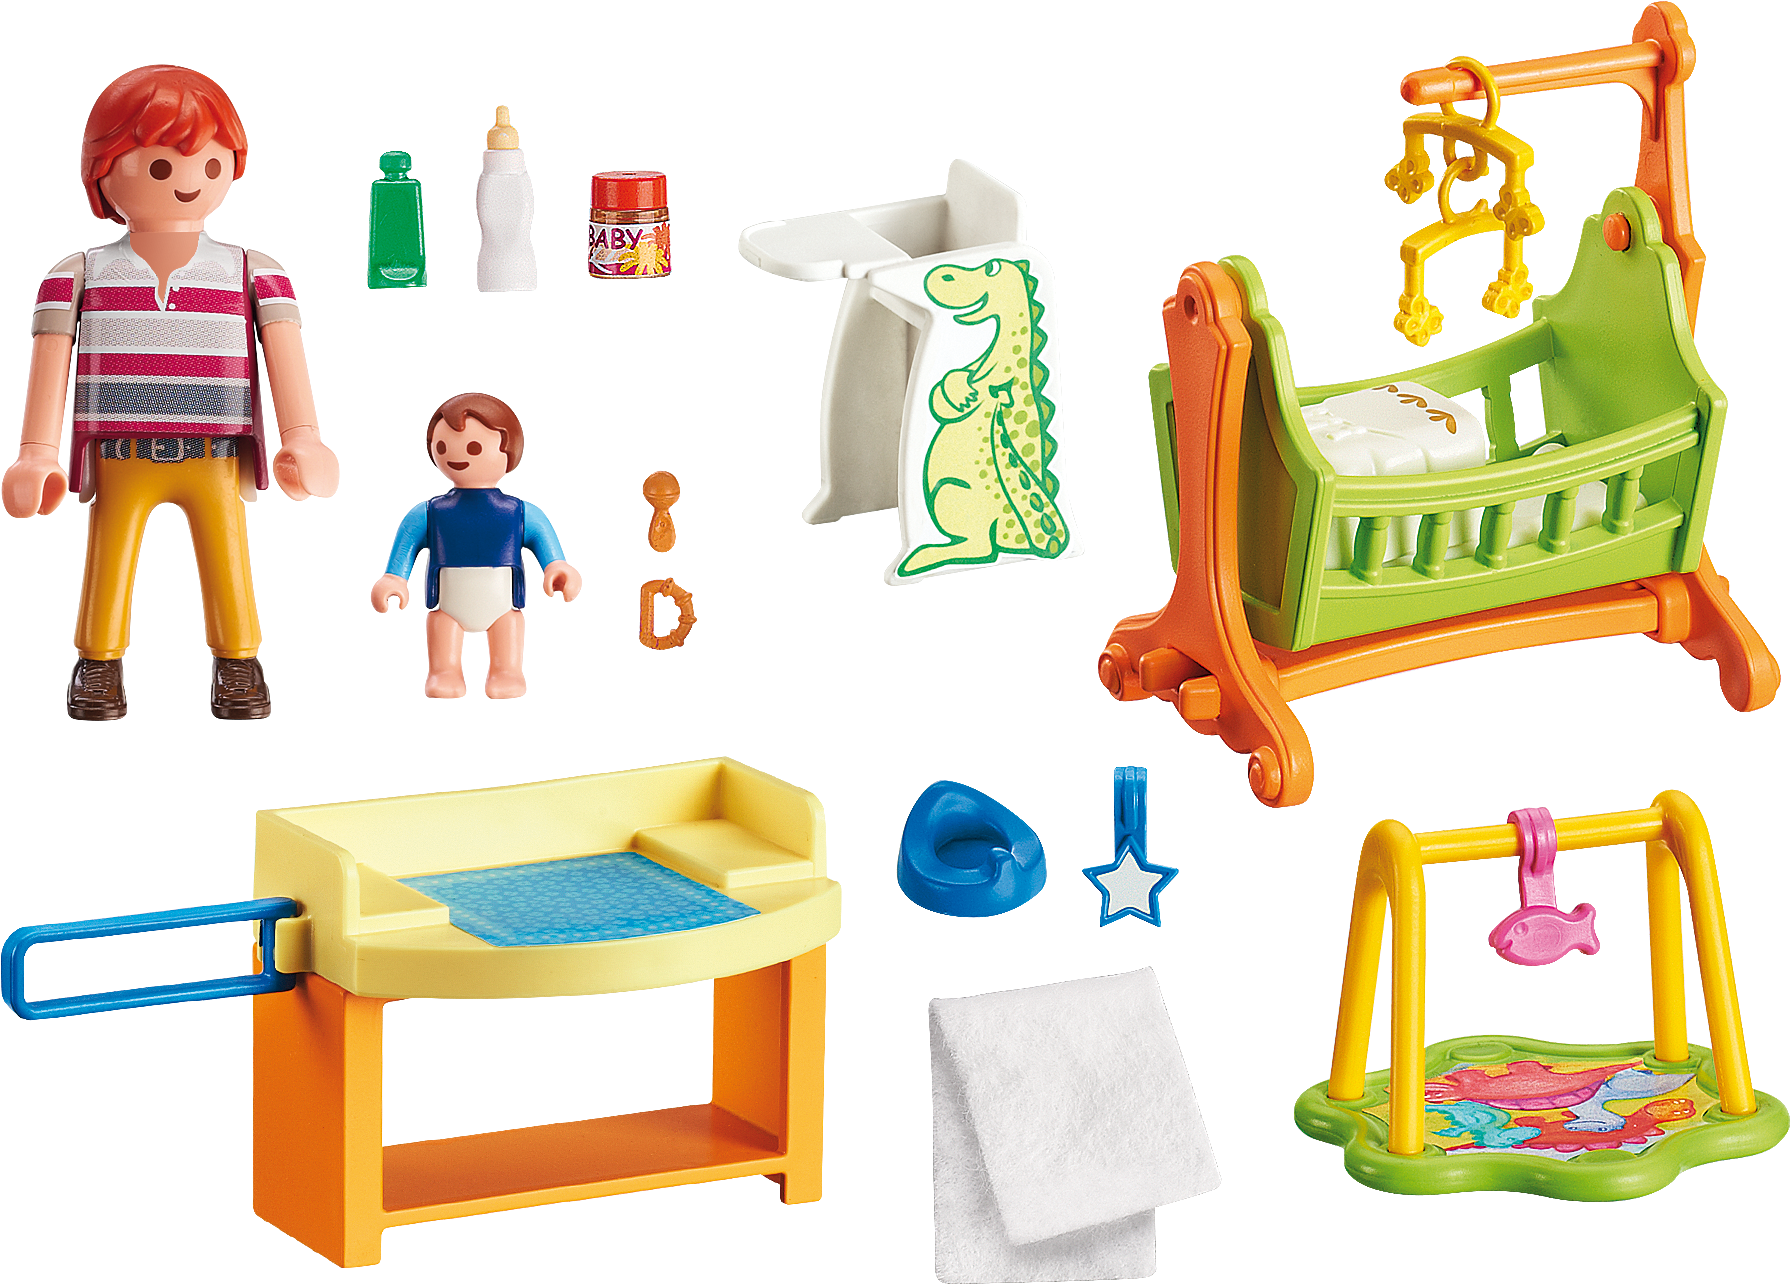 Http - //media - Playmobil - Com/i/playmobil/5304 Product - Playmobil 5304 Baby Room With Cradle (dolls (2000x1400)